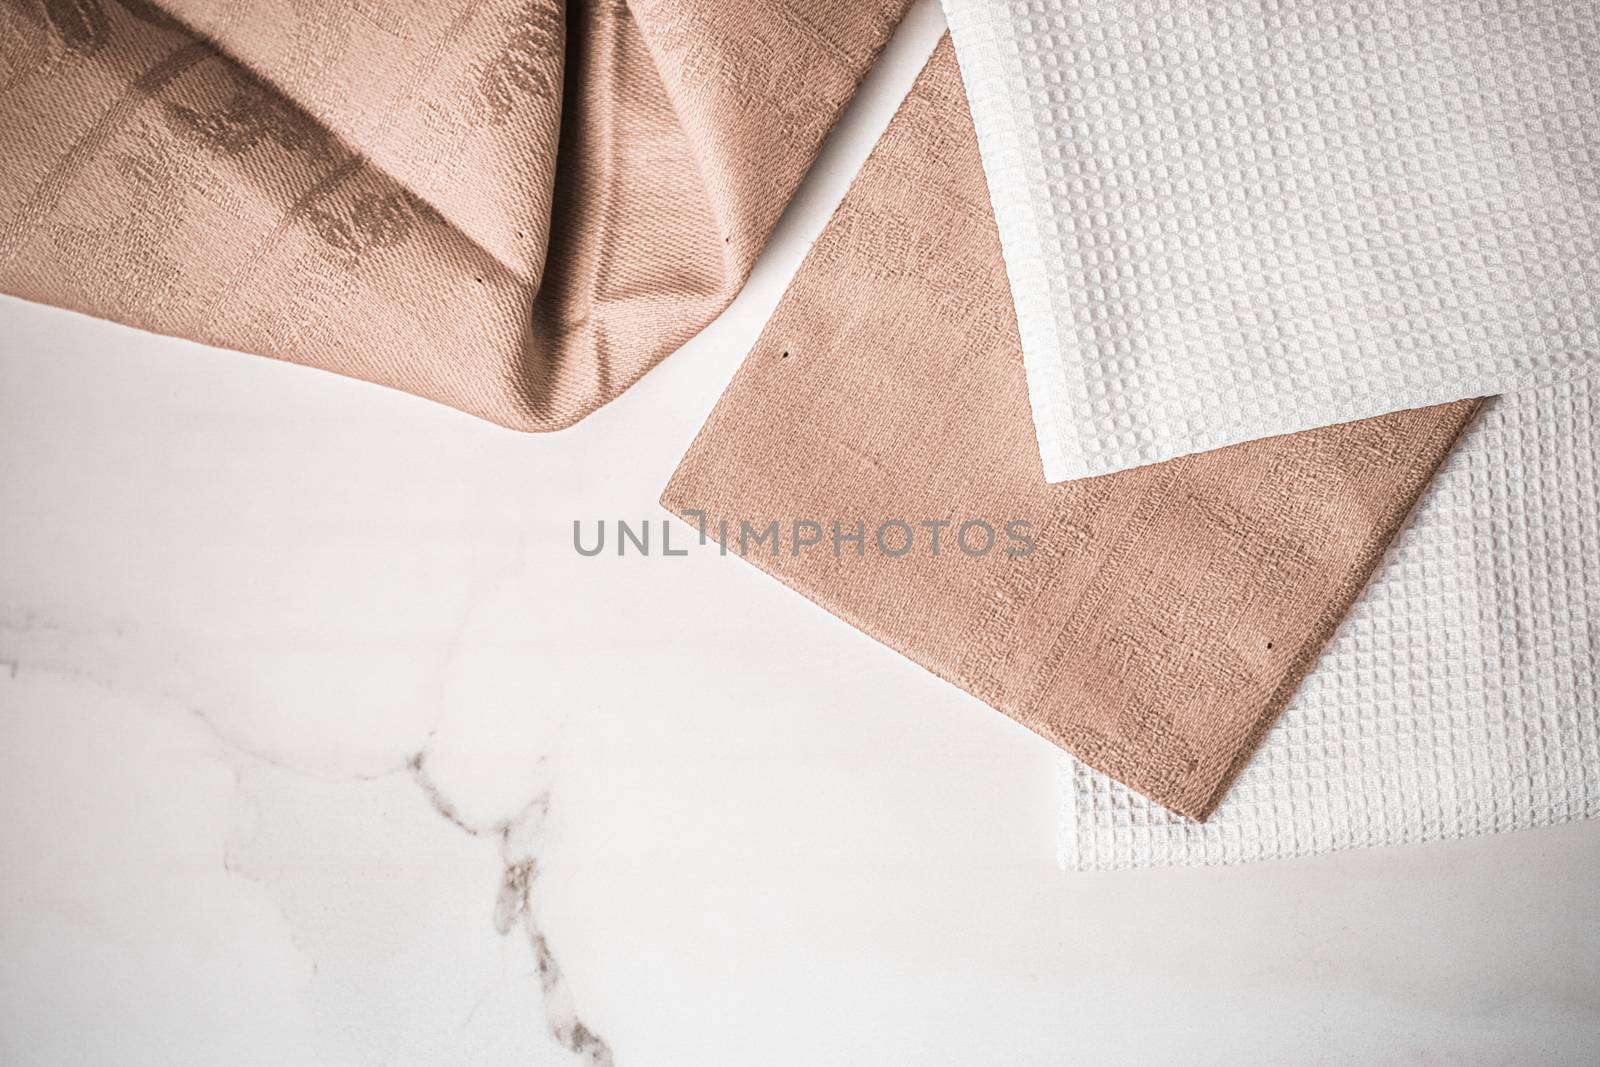 Tableware, material or cloth concept - Kitchen textile on chic white marble background, napkin and towel set, folded fabrics as food styling props for luxury home decor brand, interior design